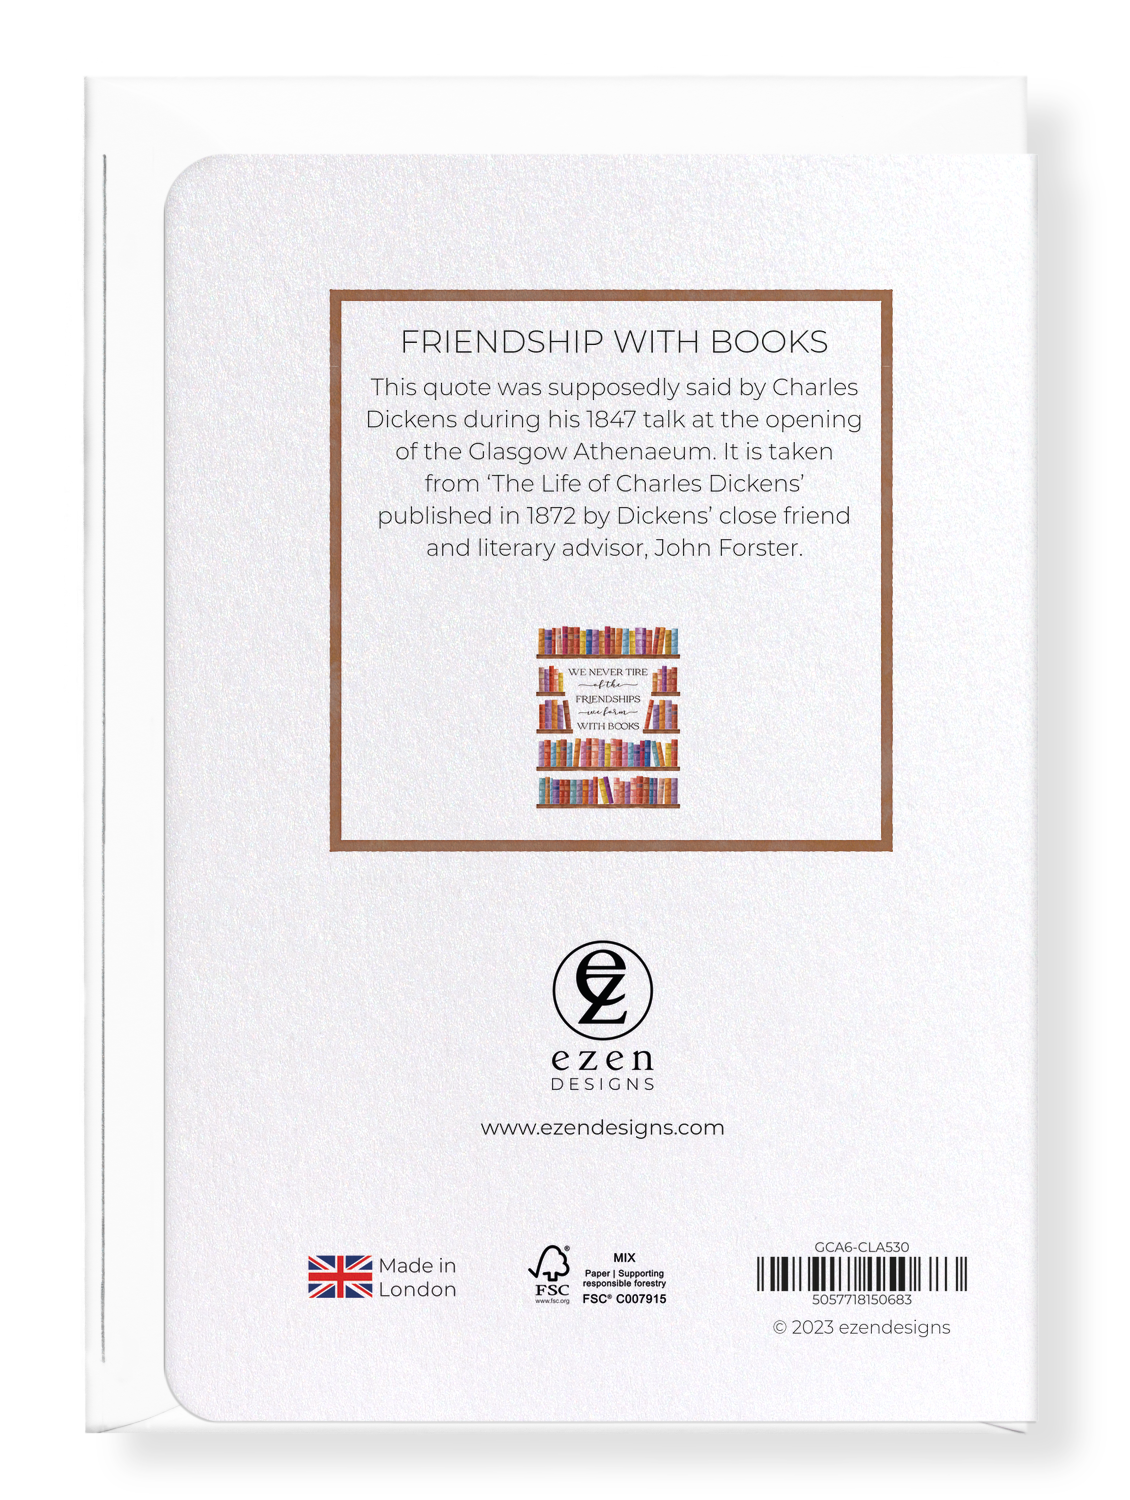 Ezen Designs - Friendship With Books - Greeting Card - Back